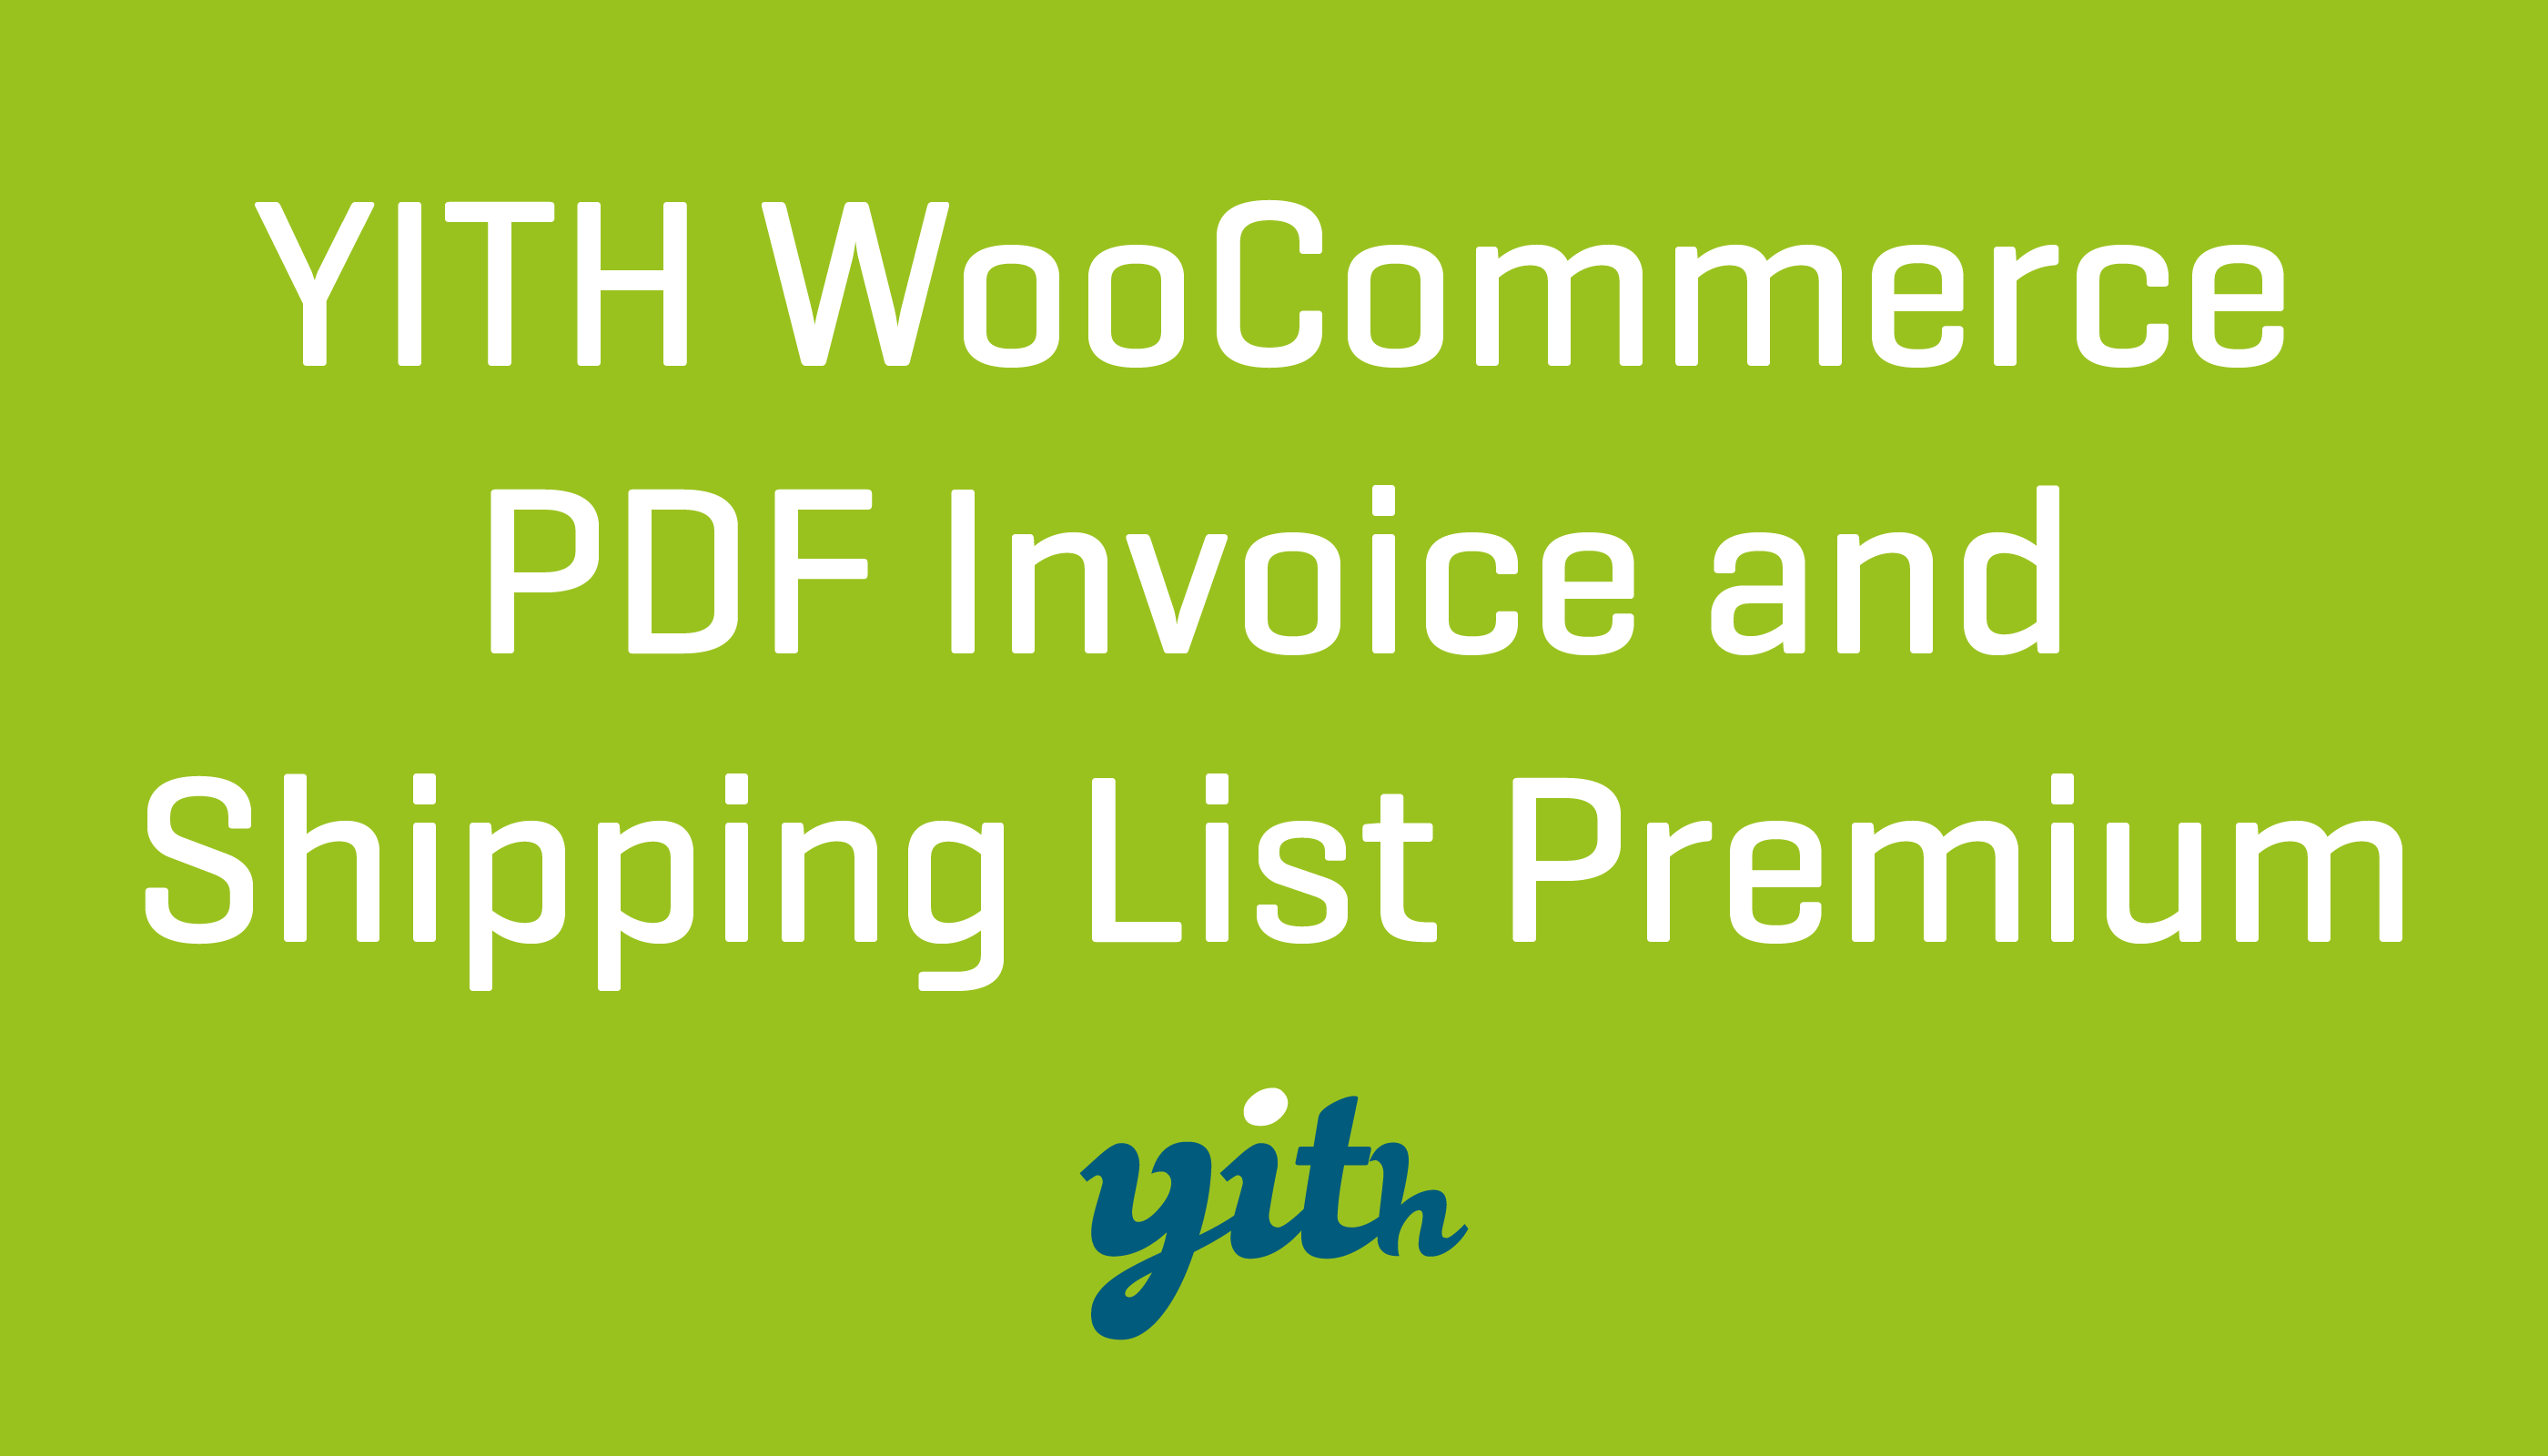 YITH Woocommerce PDF Invoice and Shipping List Premium